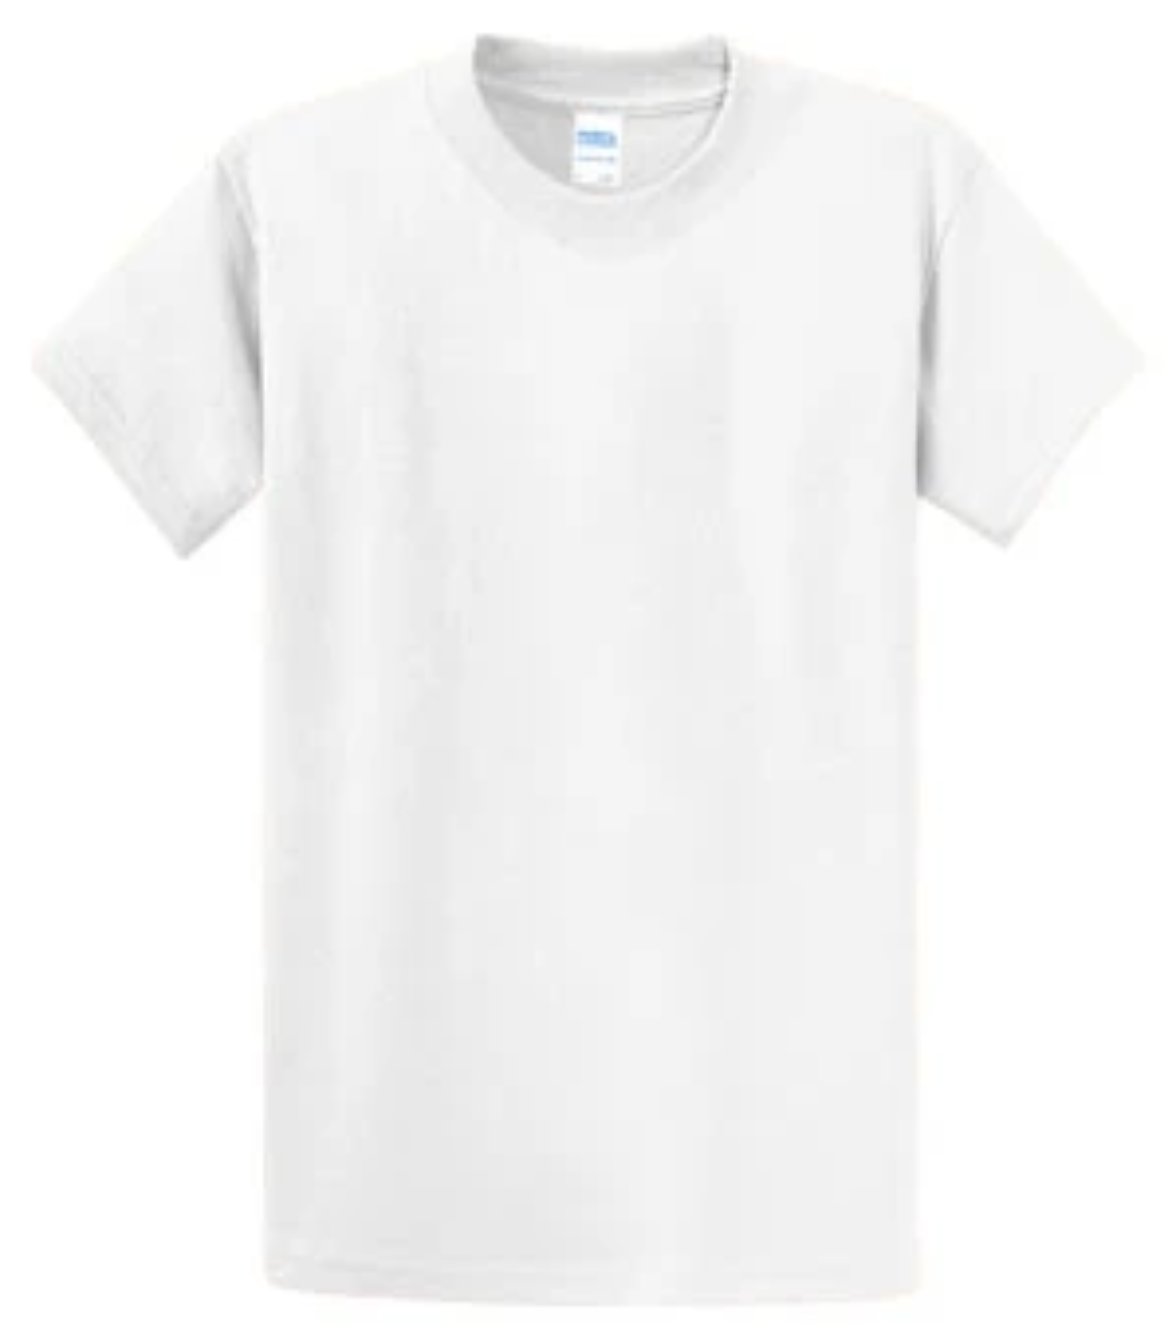 Port & Company 100% Cotton Essential T-Shirt White Tall PC61T